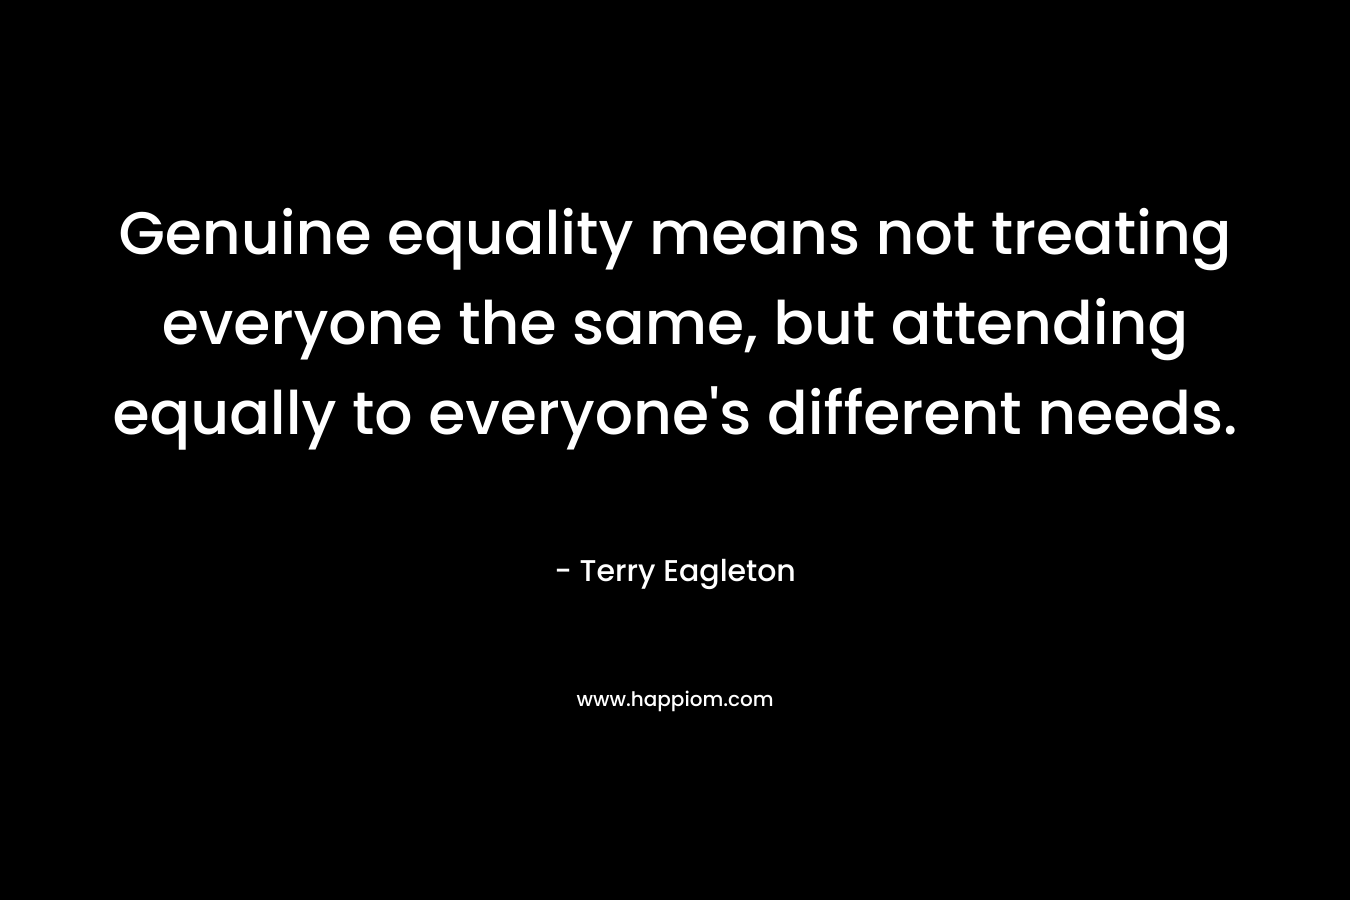 Genuine equality means not treating everyone the same, but attending equally to everyone’s different needs. – Terry Eagleton